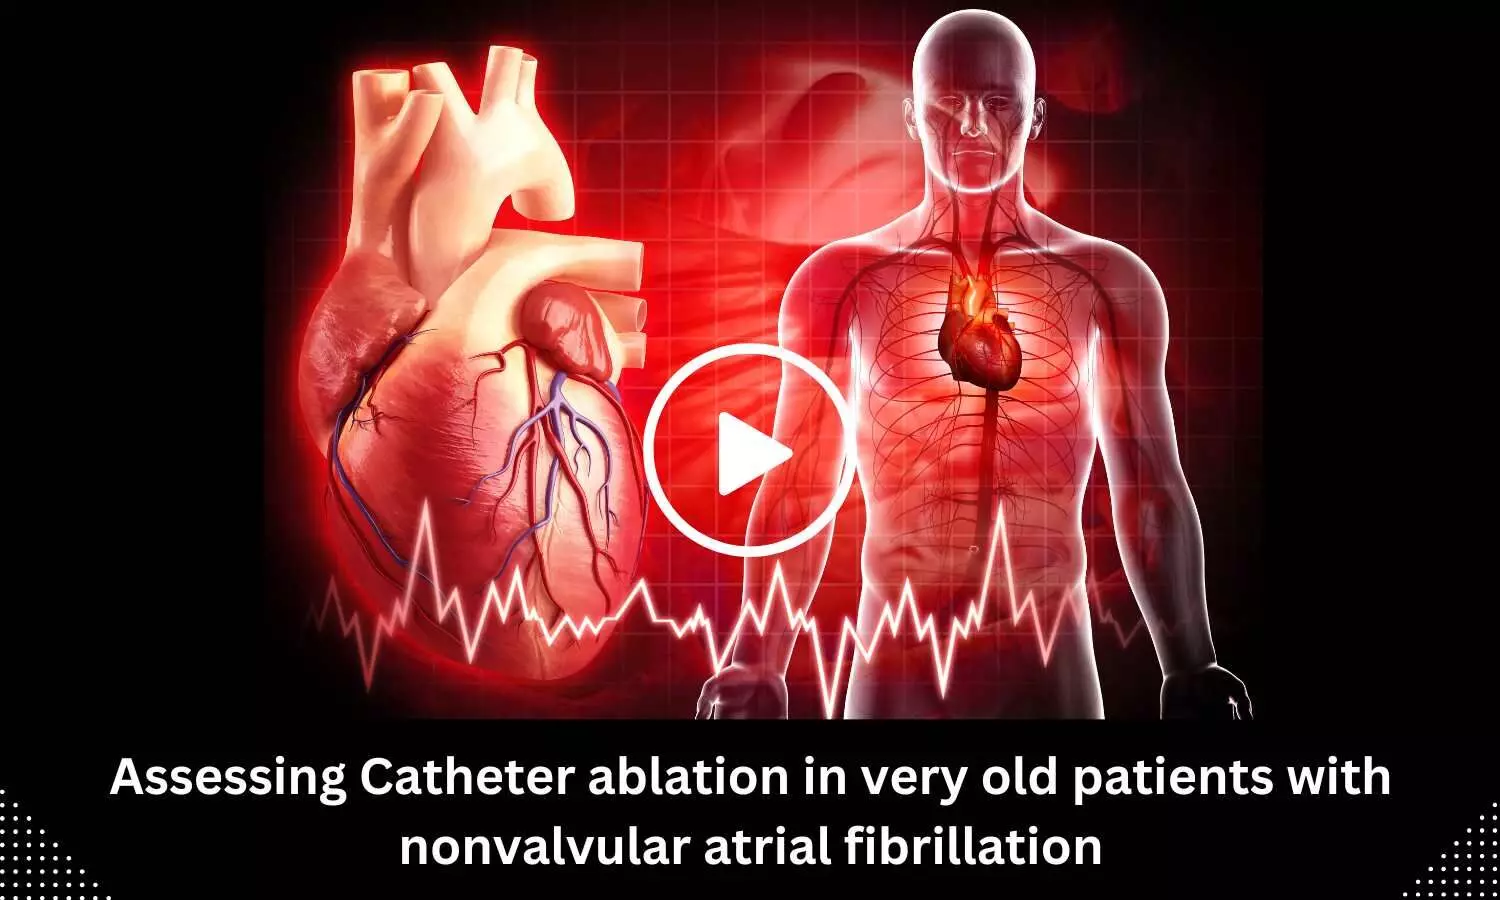 Assessing Catheter ablation in very old patients with nonvalvular atrial fibrillation